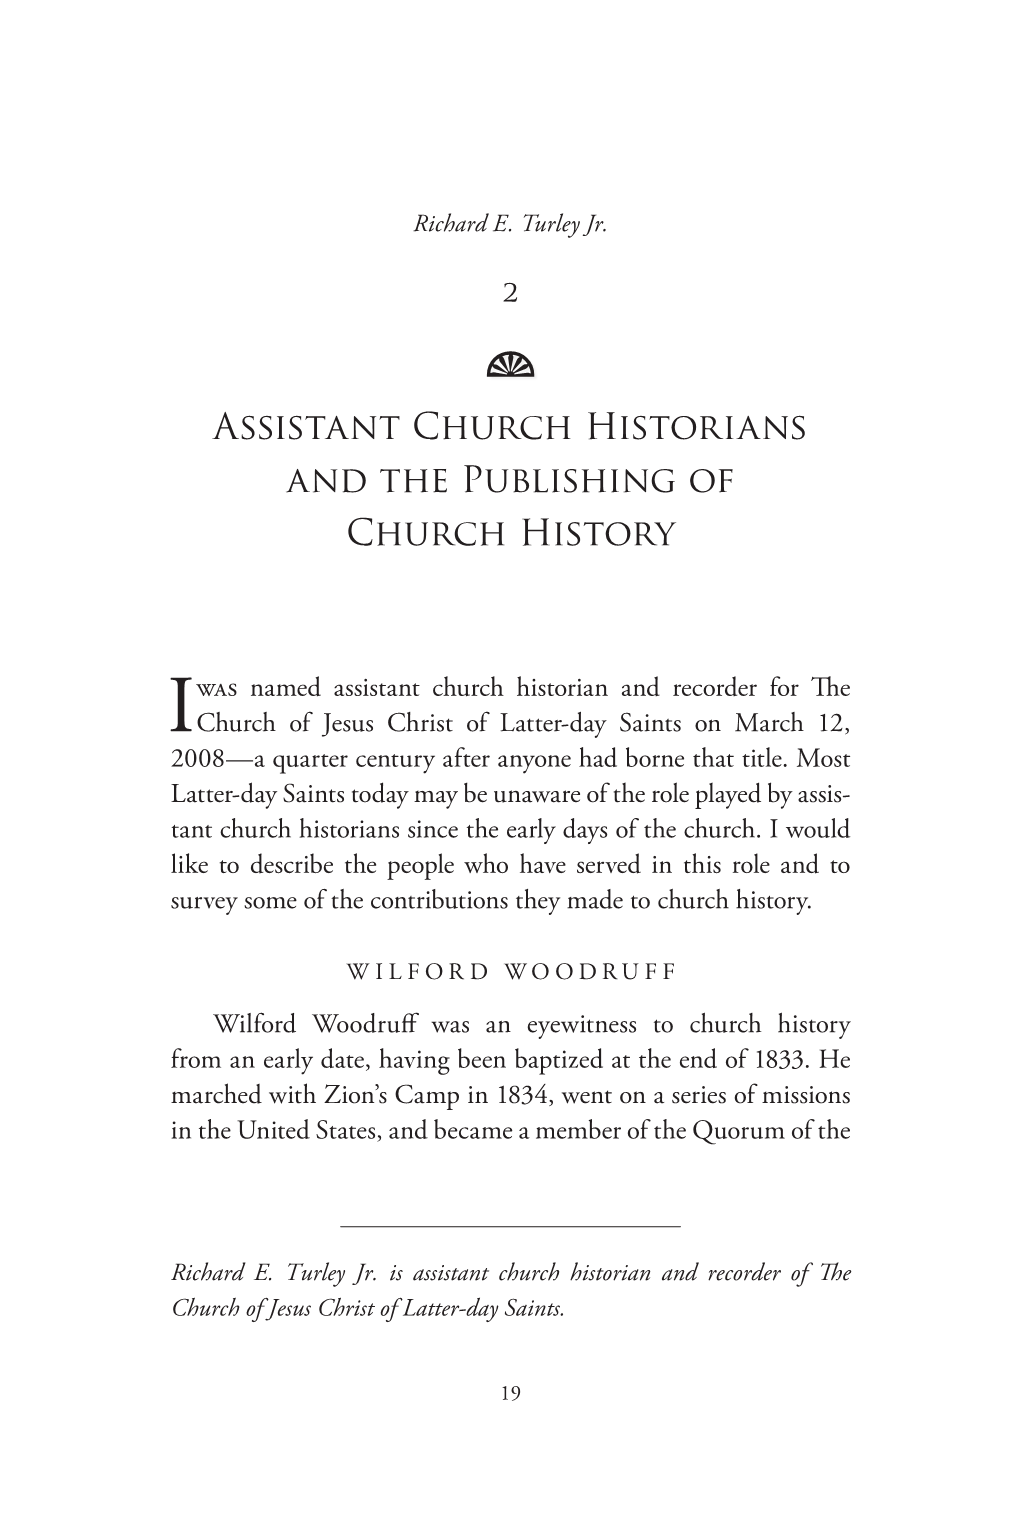 Assistant Church Historians and the Publishing of Church History